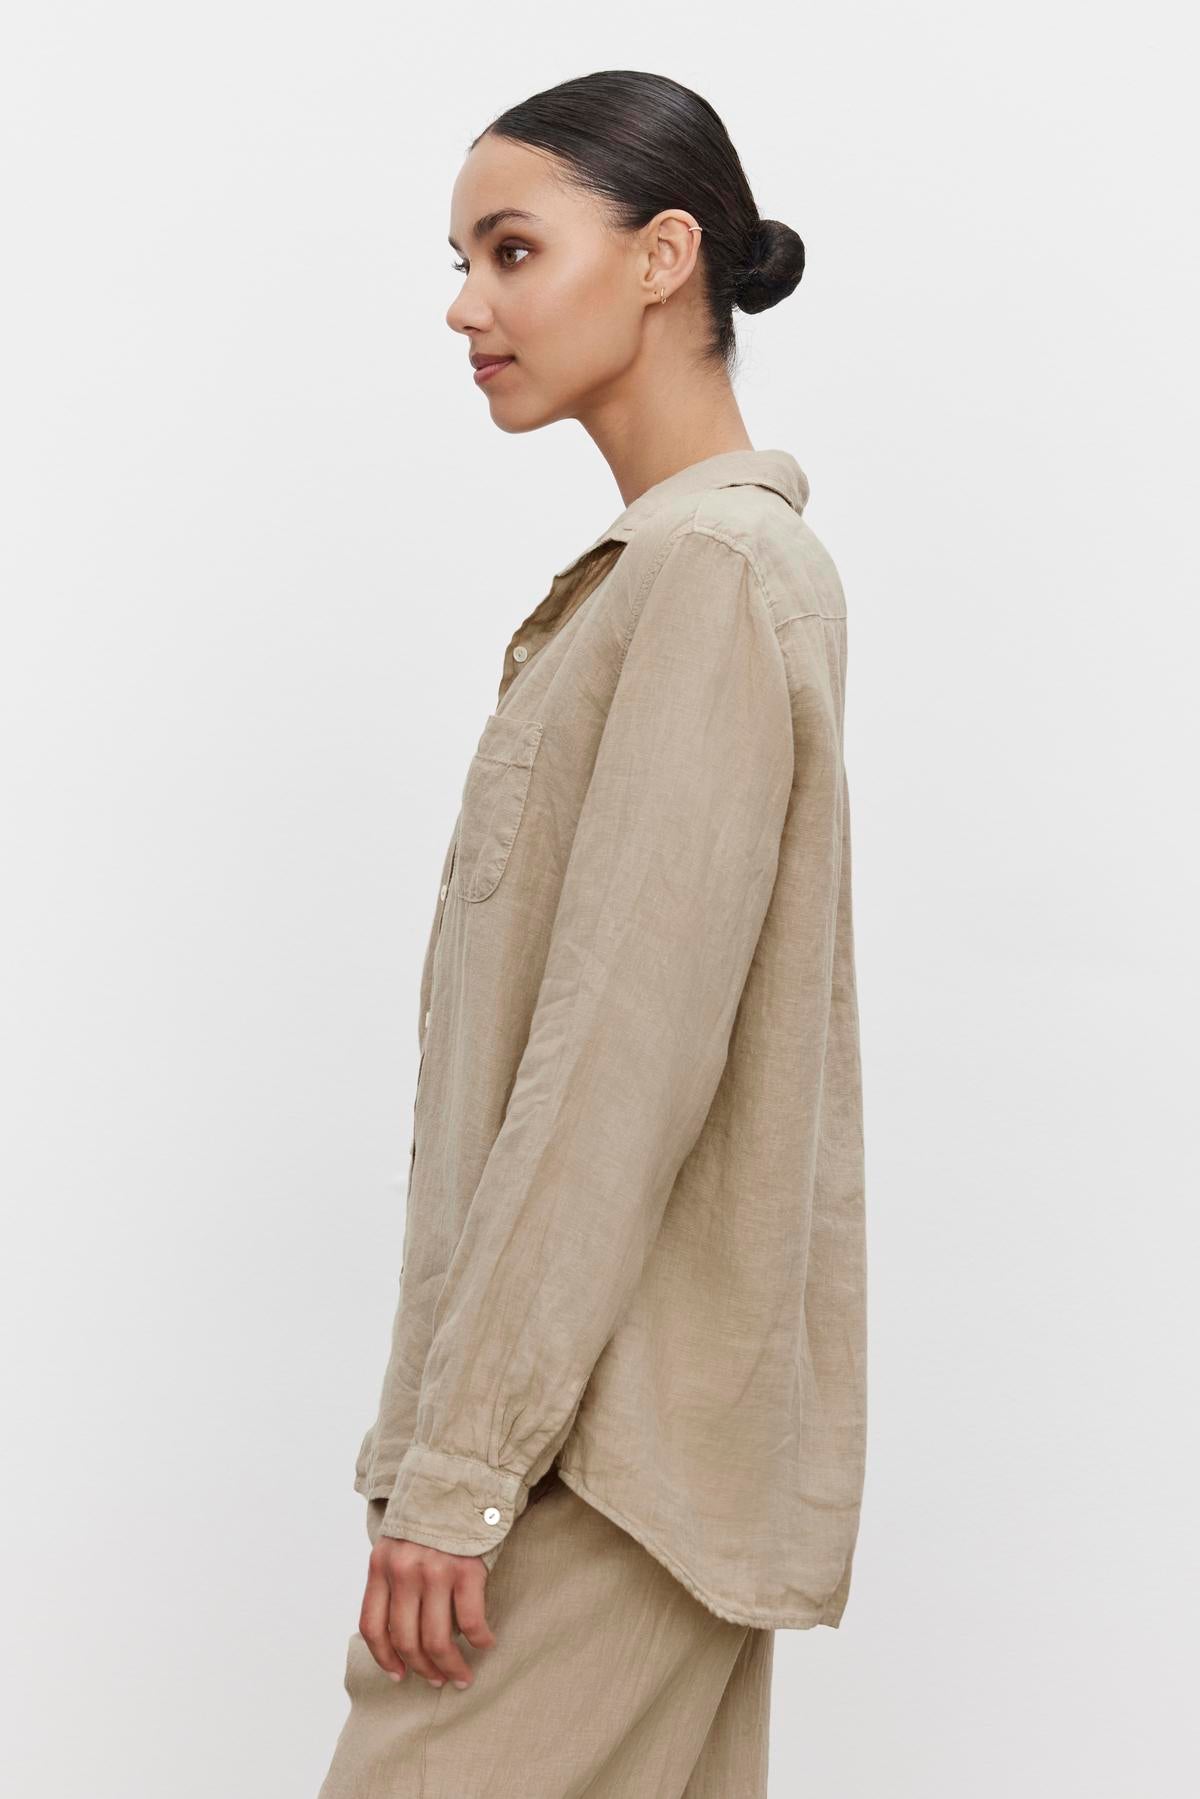   A person with dark hair tied in a bun is standing sideways, wearing a light beige linen button-up shirt and matching pants, featuring a scooped hemline against a plain white background. The shirt is the MULHOLLAND LINEN SHIRT by Velvet by Jenny Graham. 